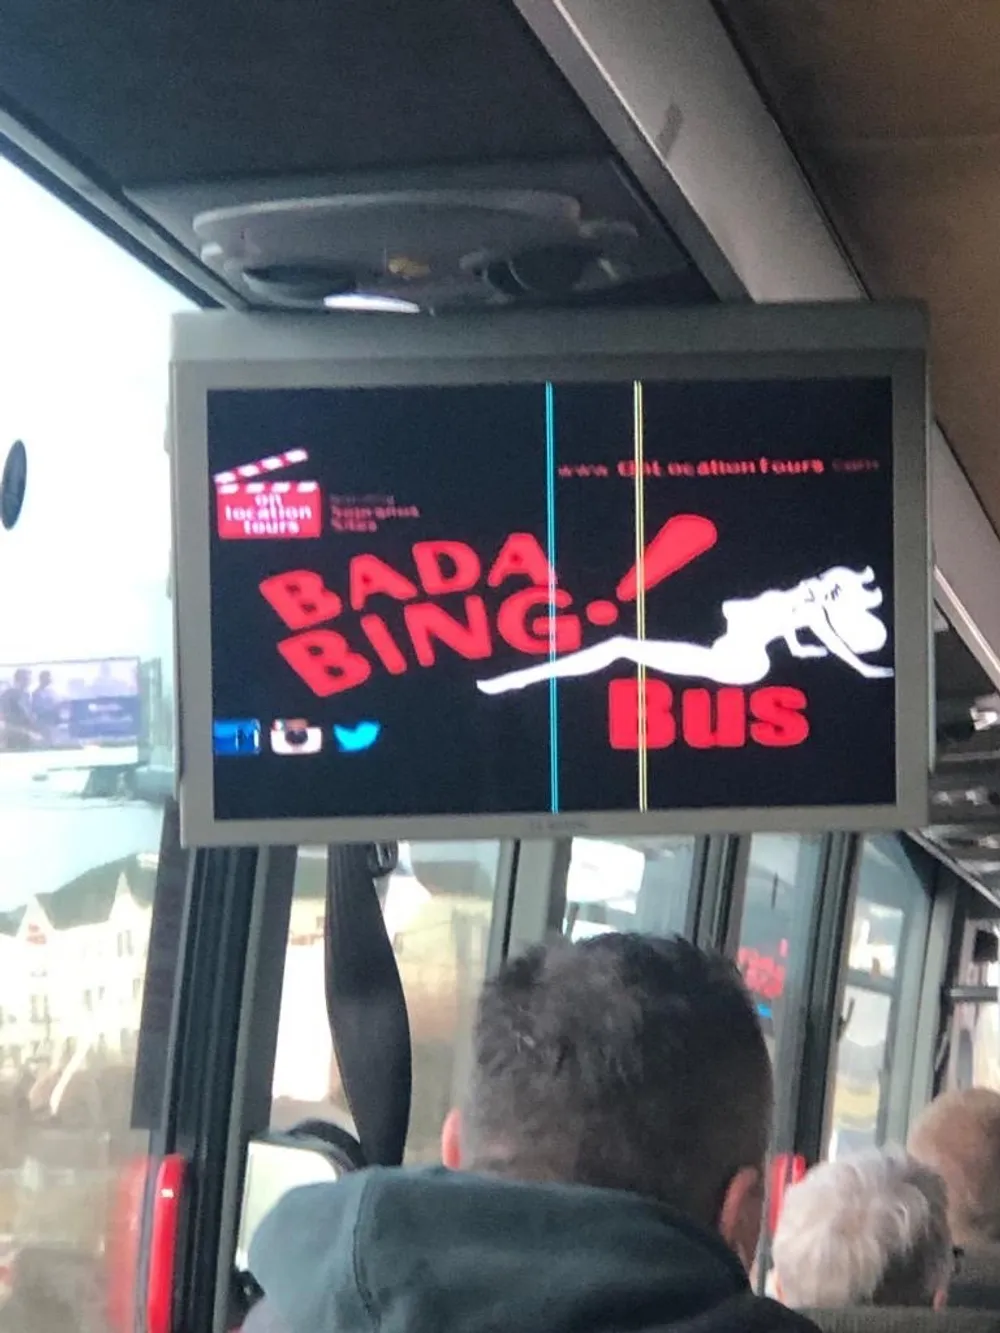 The image shows a digital display inside a bus with the words BADA BING BUS in red letters an outline of a bull and blurry background that indicates it might be taken from a moving vehicle or in a crowded setting